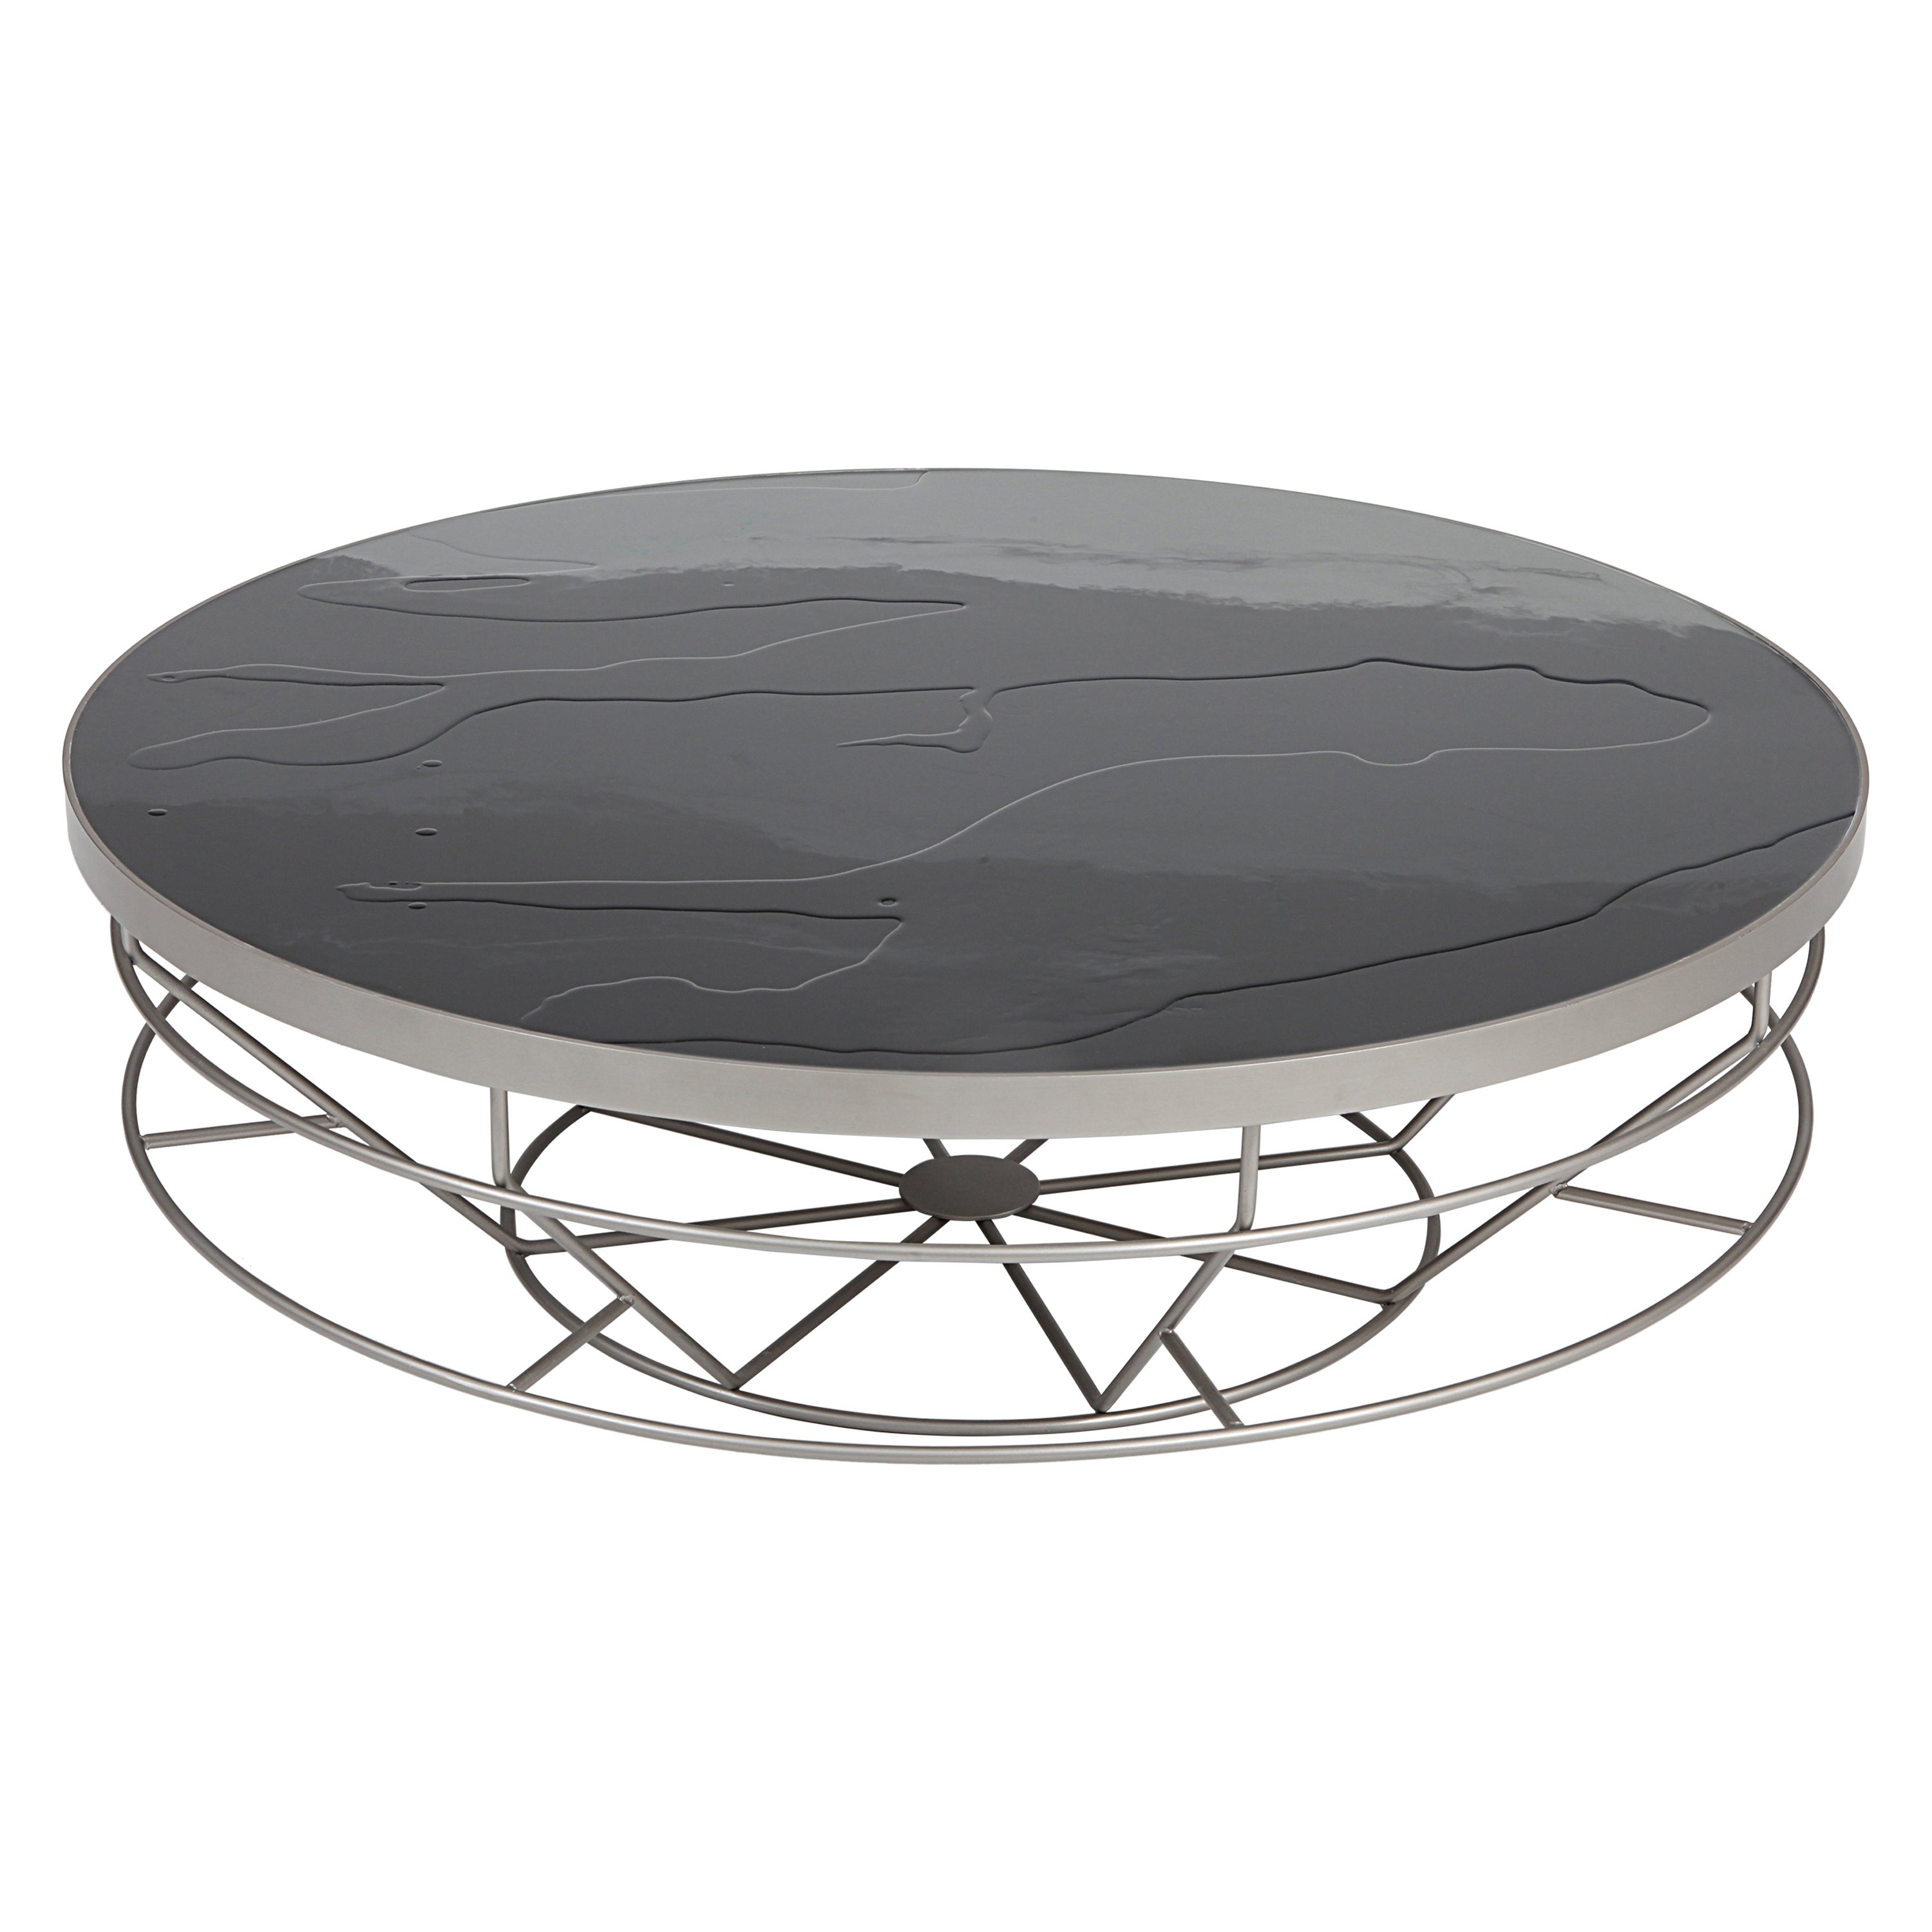 Olis Coffee Table by Dalmoto For Sale